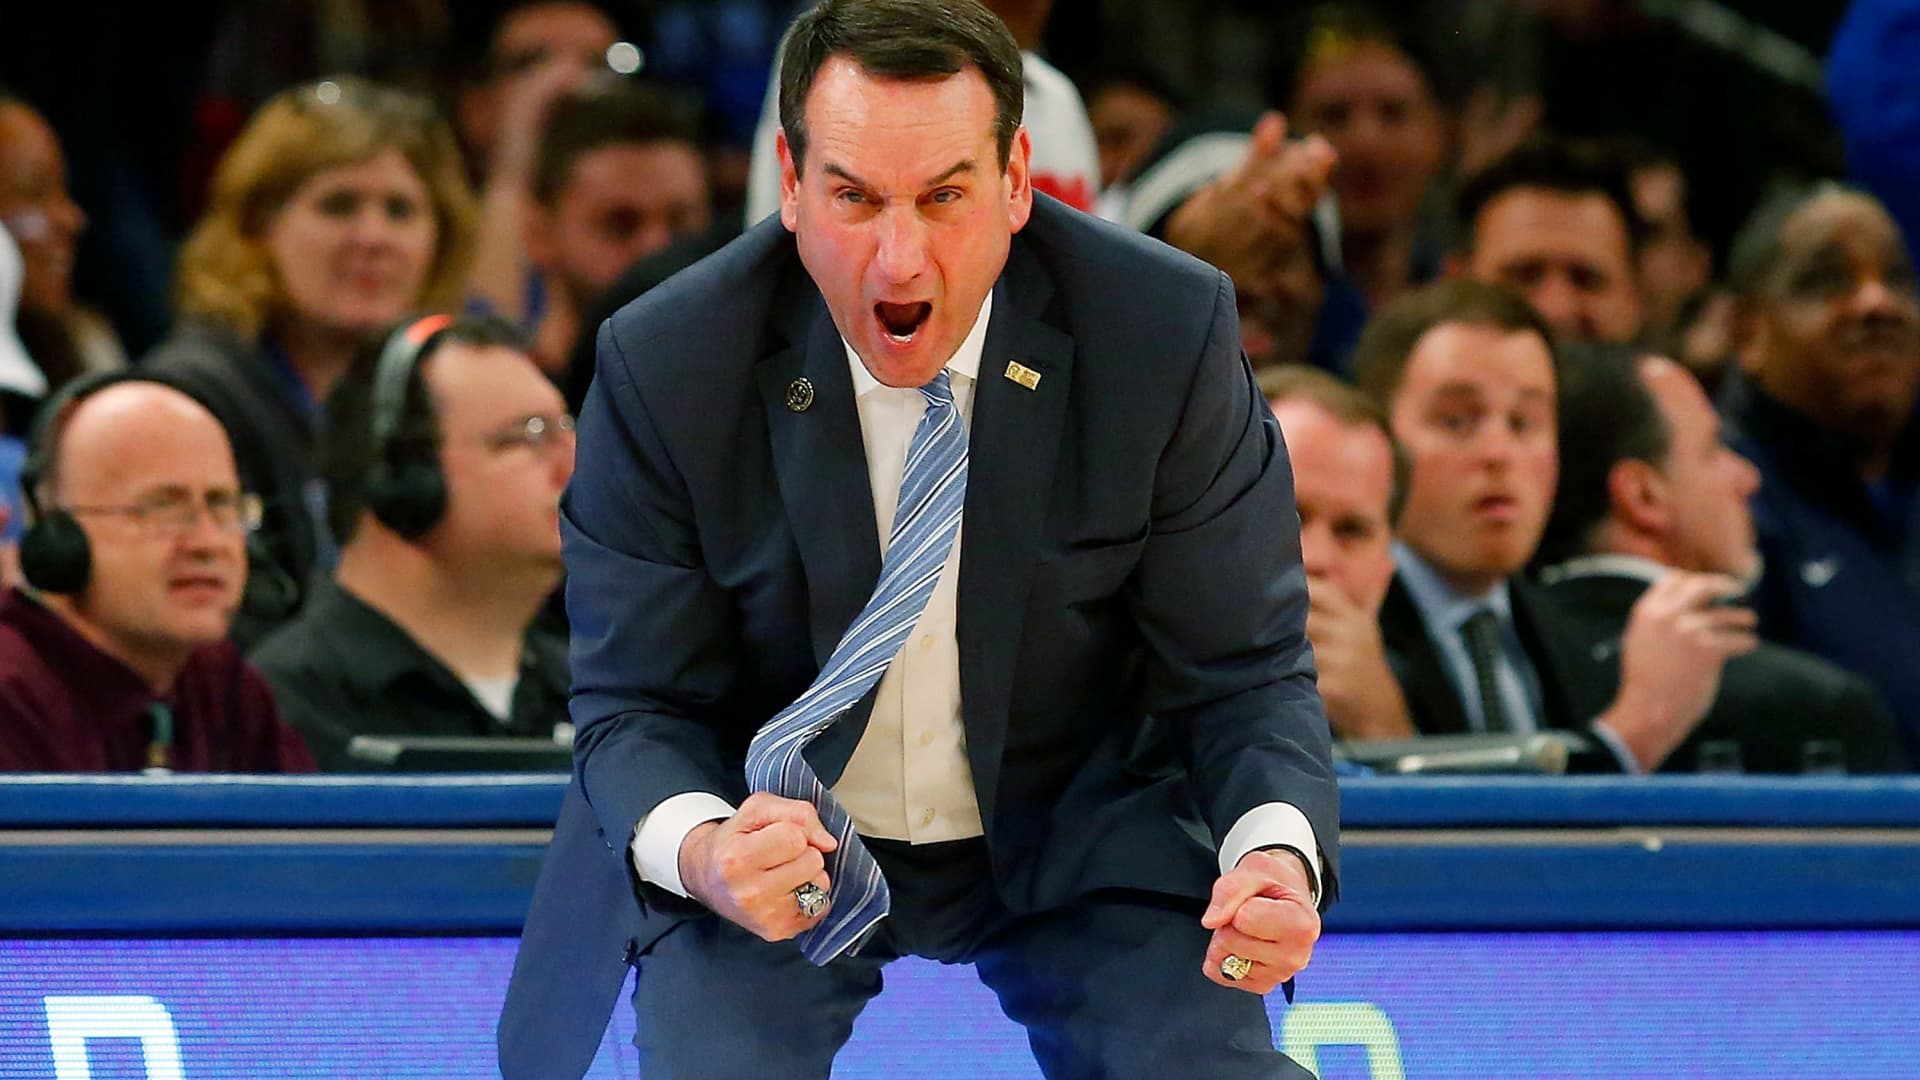 How much tickets for Coach Krzyzewski's last game at Duke cost